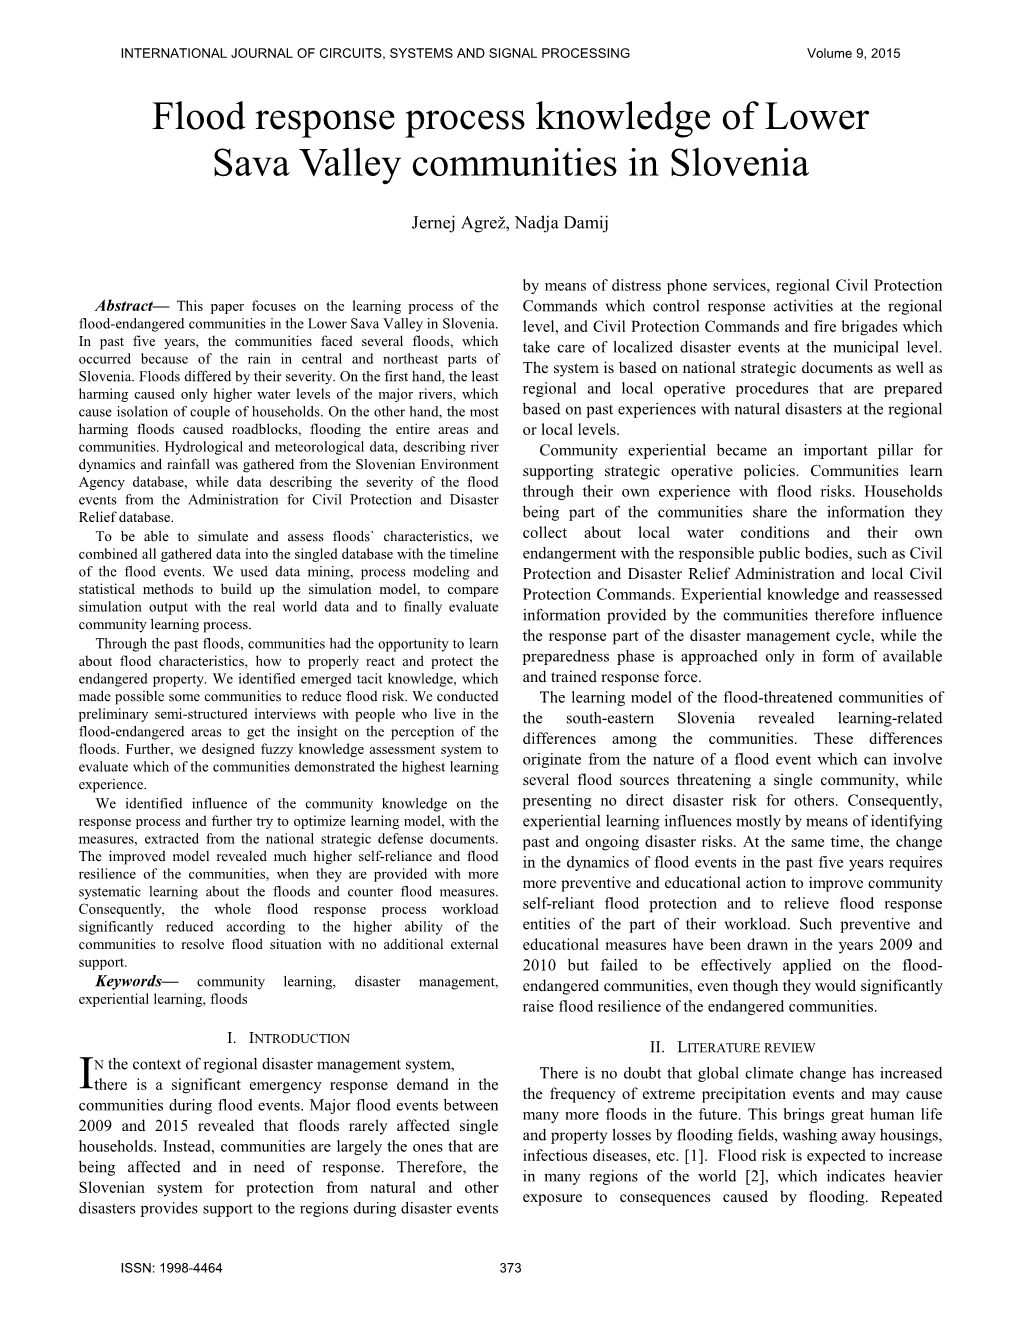 Flood Response Process Knowledge of Lower Sava Valley Communities in Slovenia